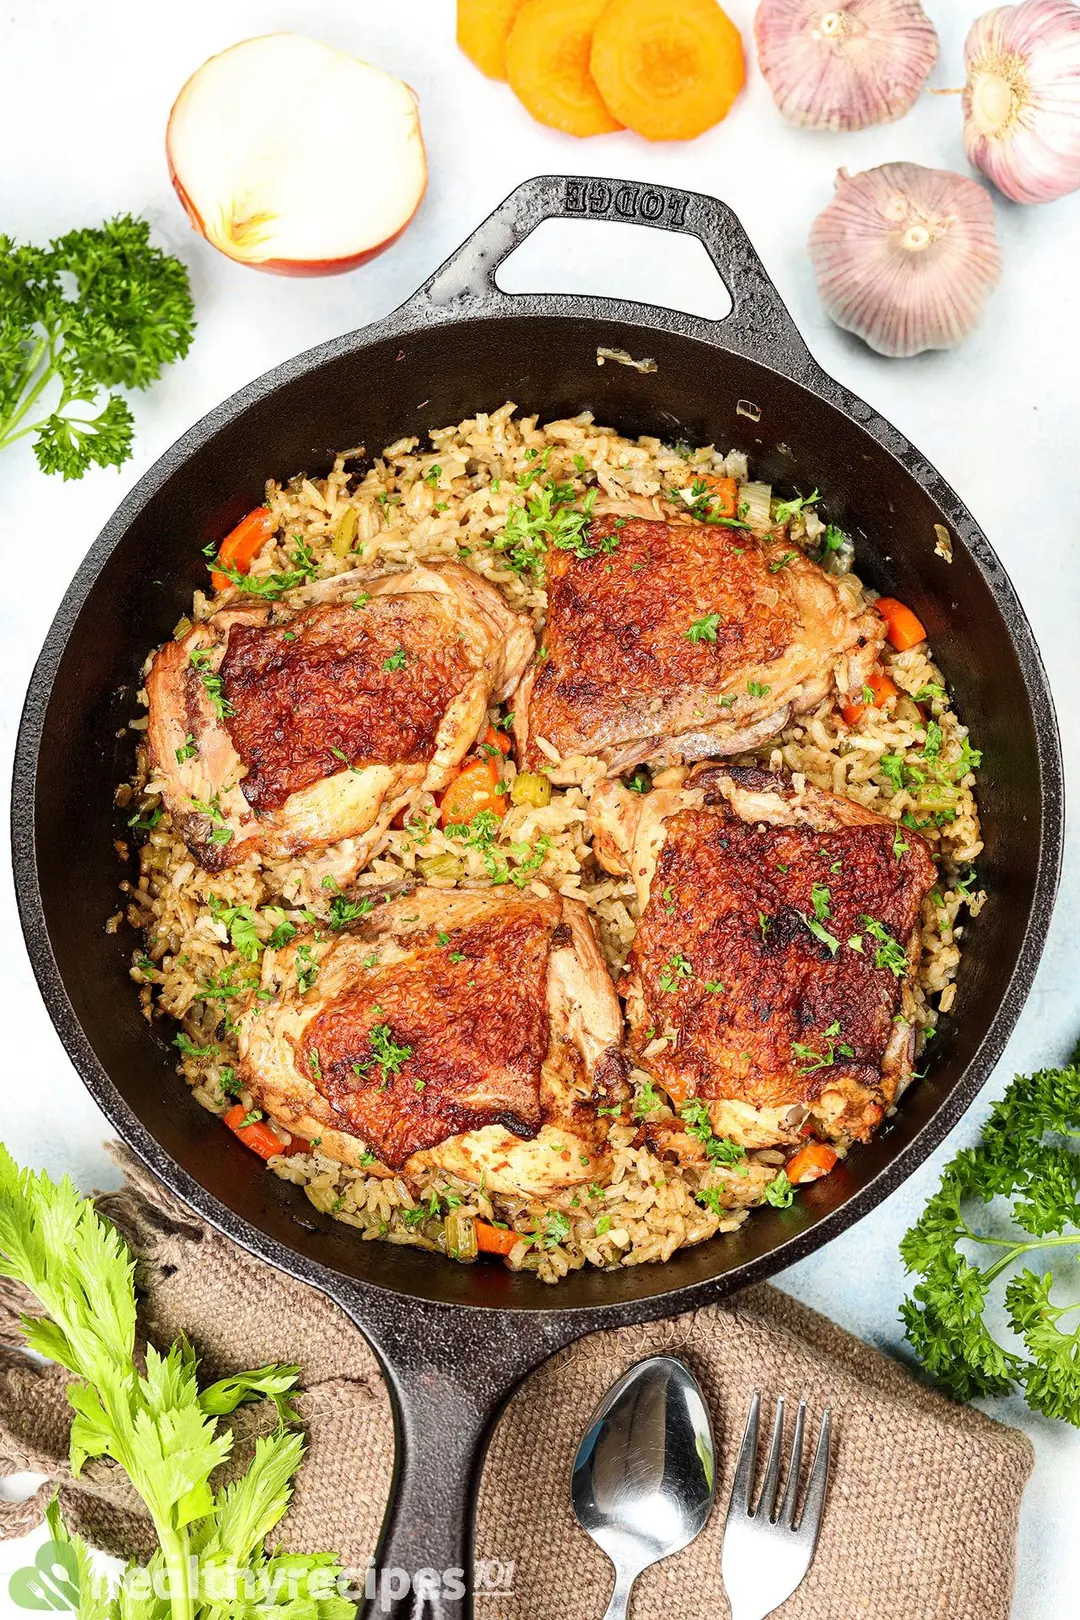 Four chicken thighs on top of cooked rice in a cast iron skillet decorated with a tablecloth, utensils, and ingredients of the recipe